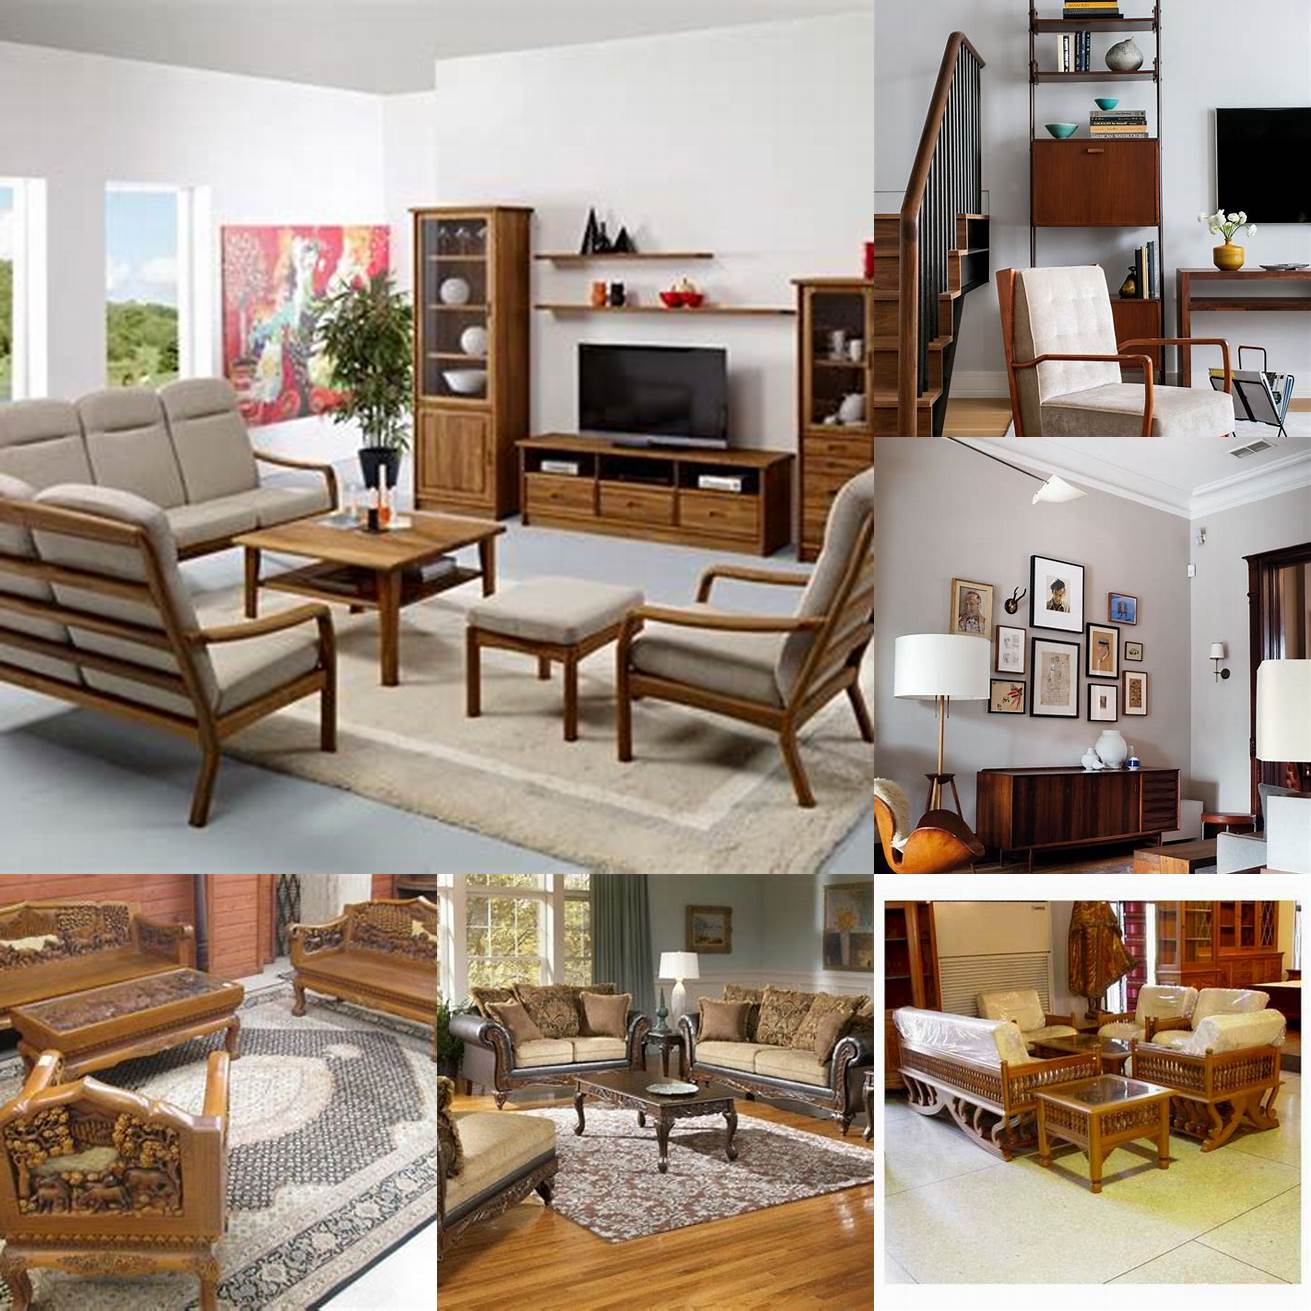 A picture of teak living room furniture